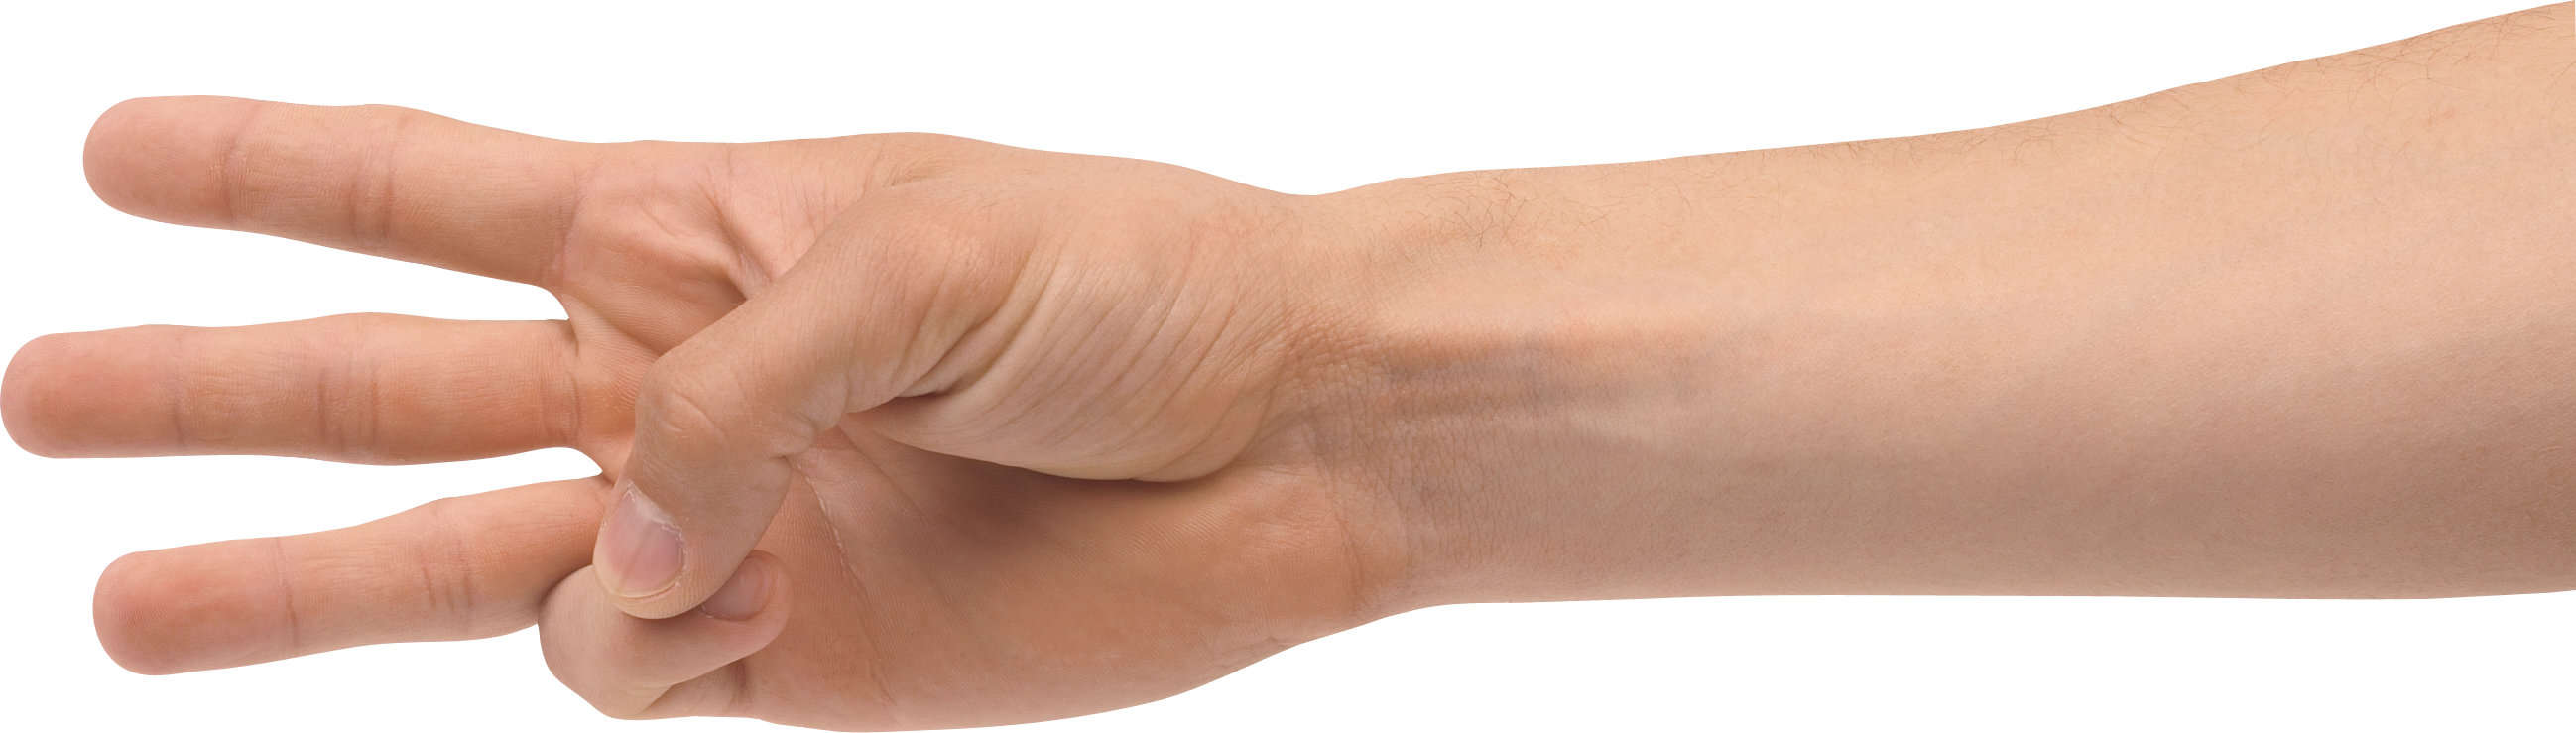 Hands clipart forearm. Three finger hand png